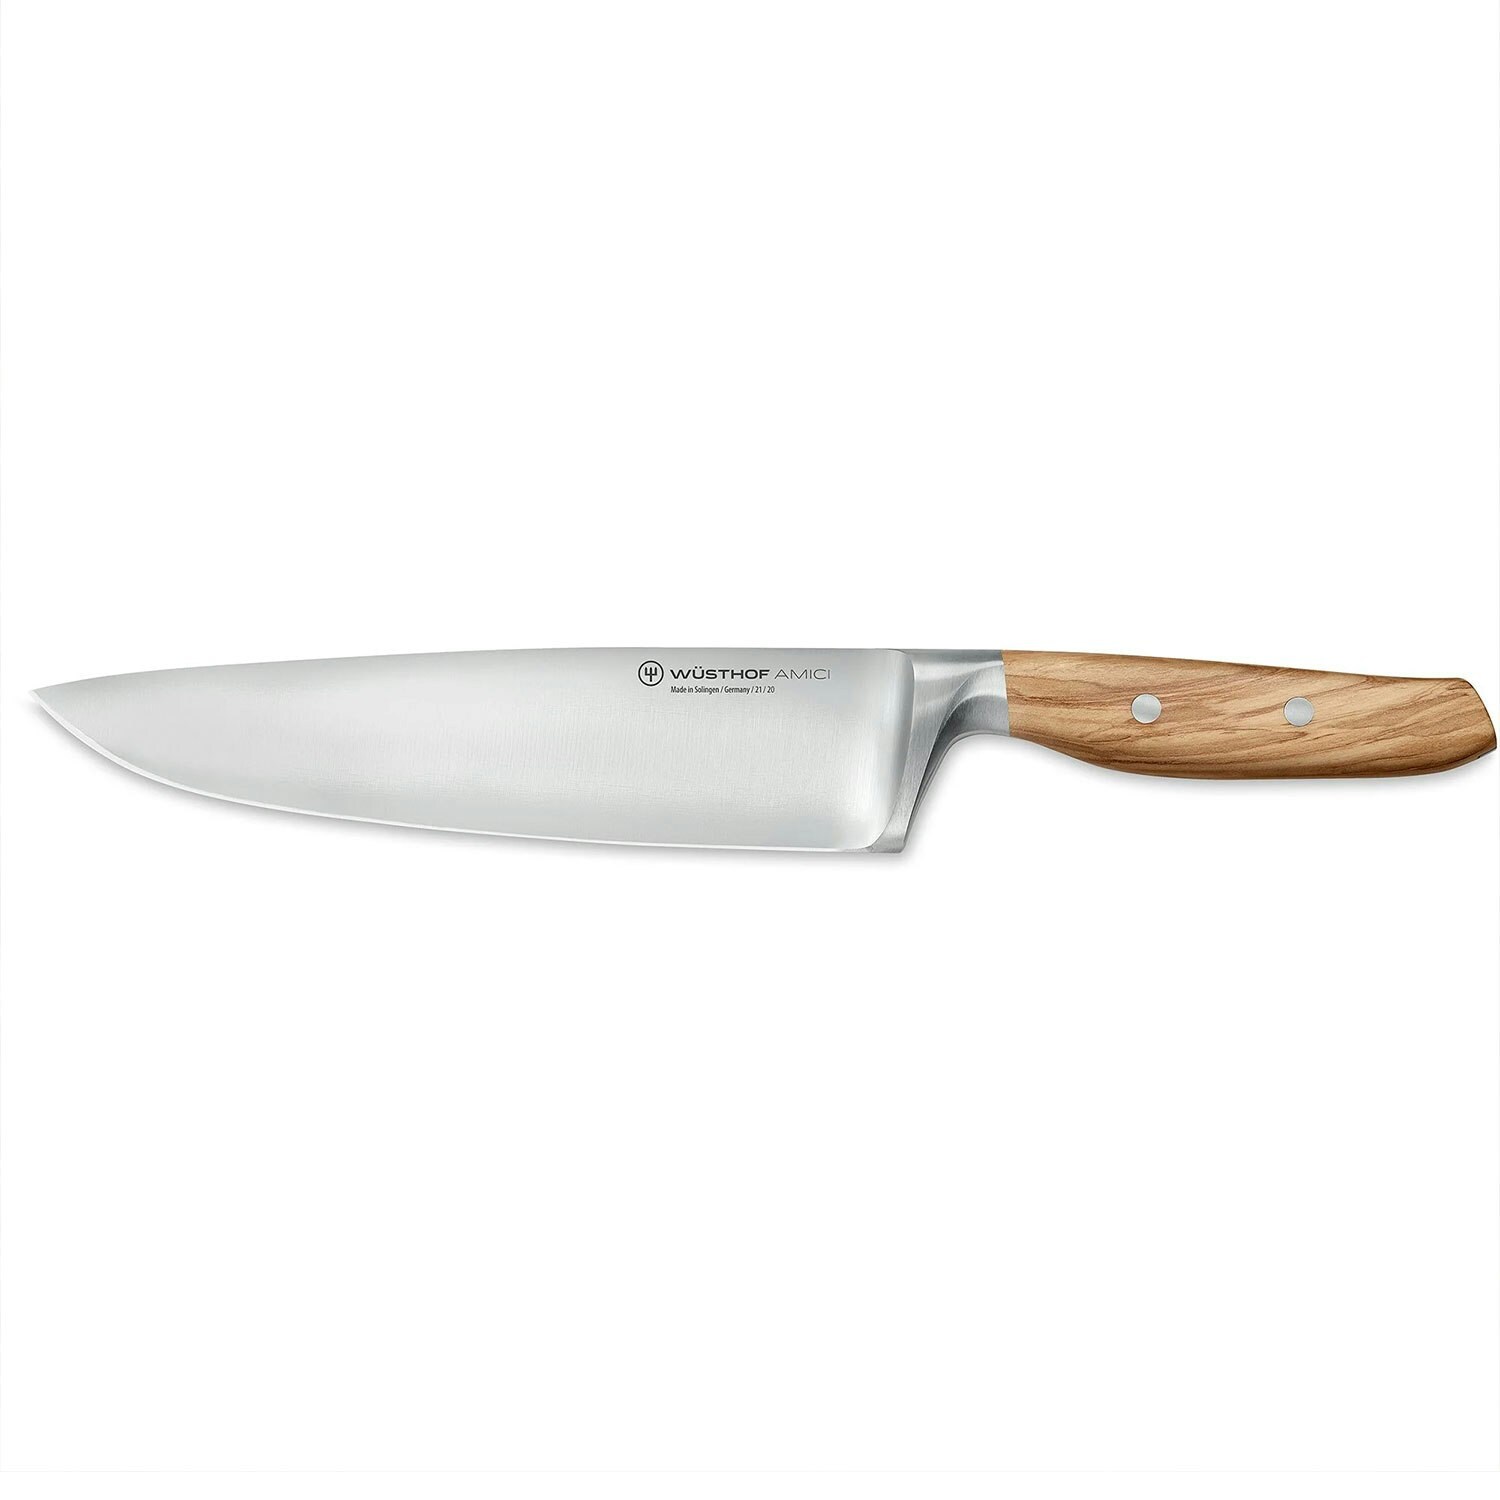 Ego VG-10 Chef Knife 20 cm - Chef Knives Stainless Steel - 700232